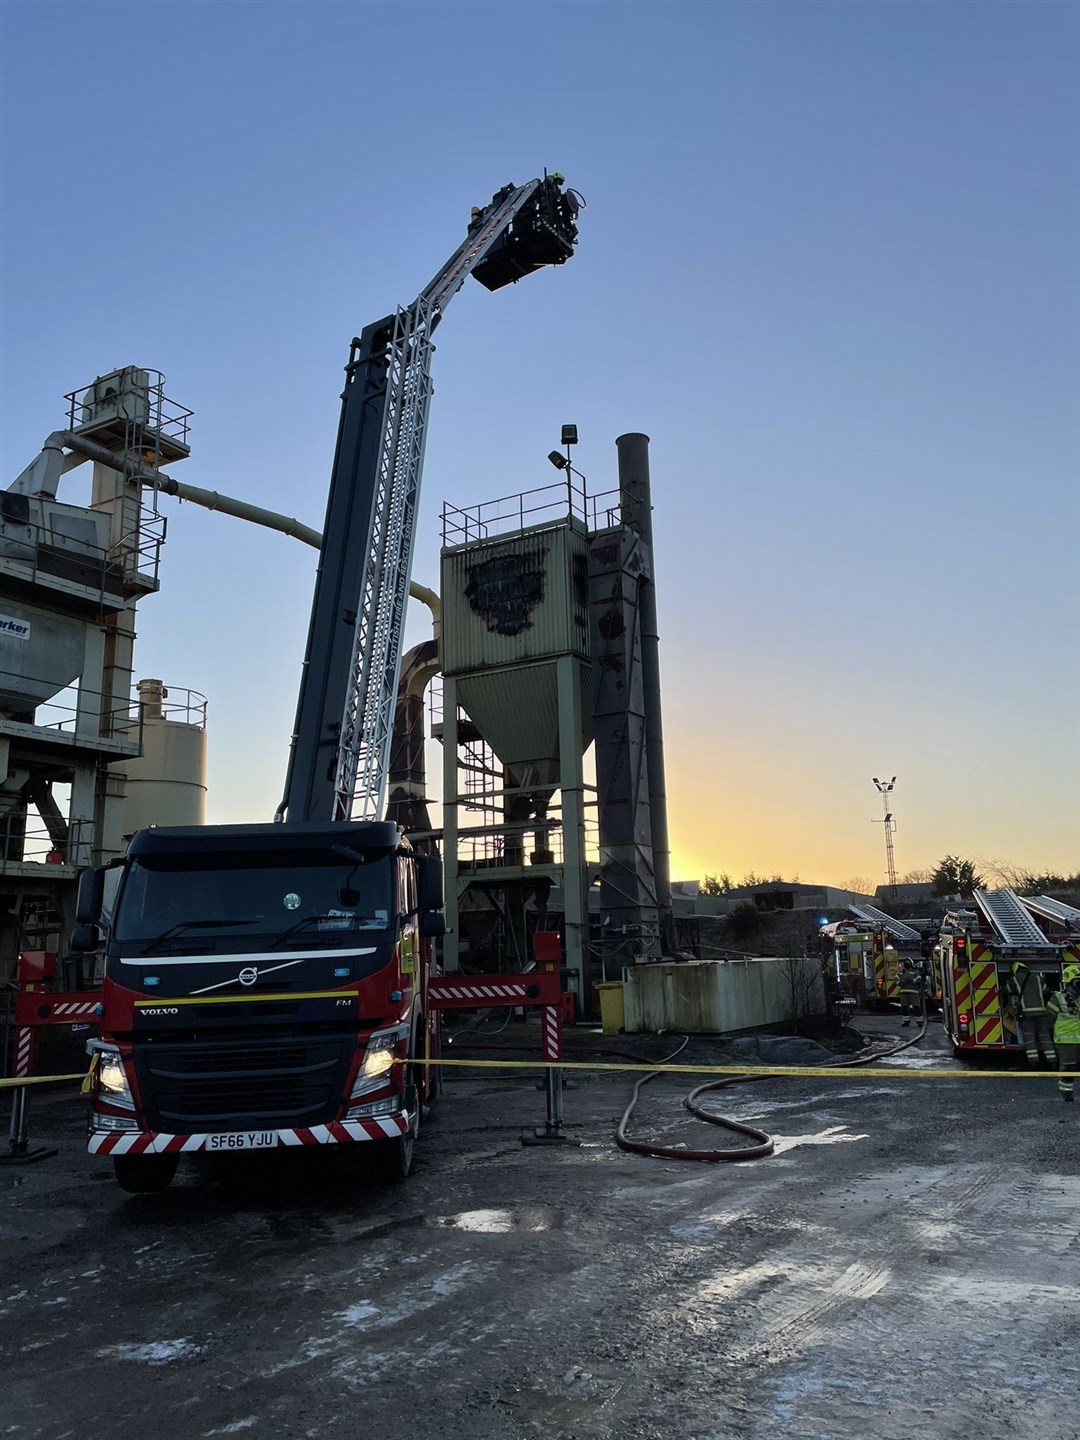 Fire engines at the scene of the fire, which was located inside an industrial dryer. Picture: Scottish Fire and Rescue Service.